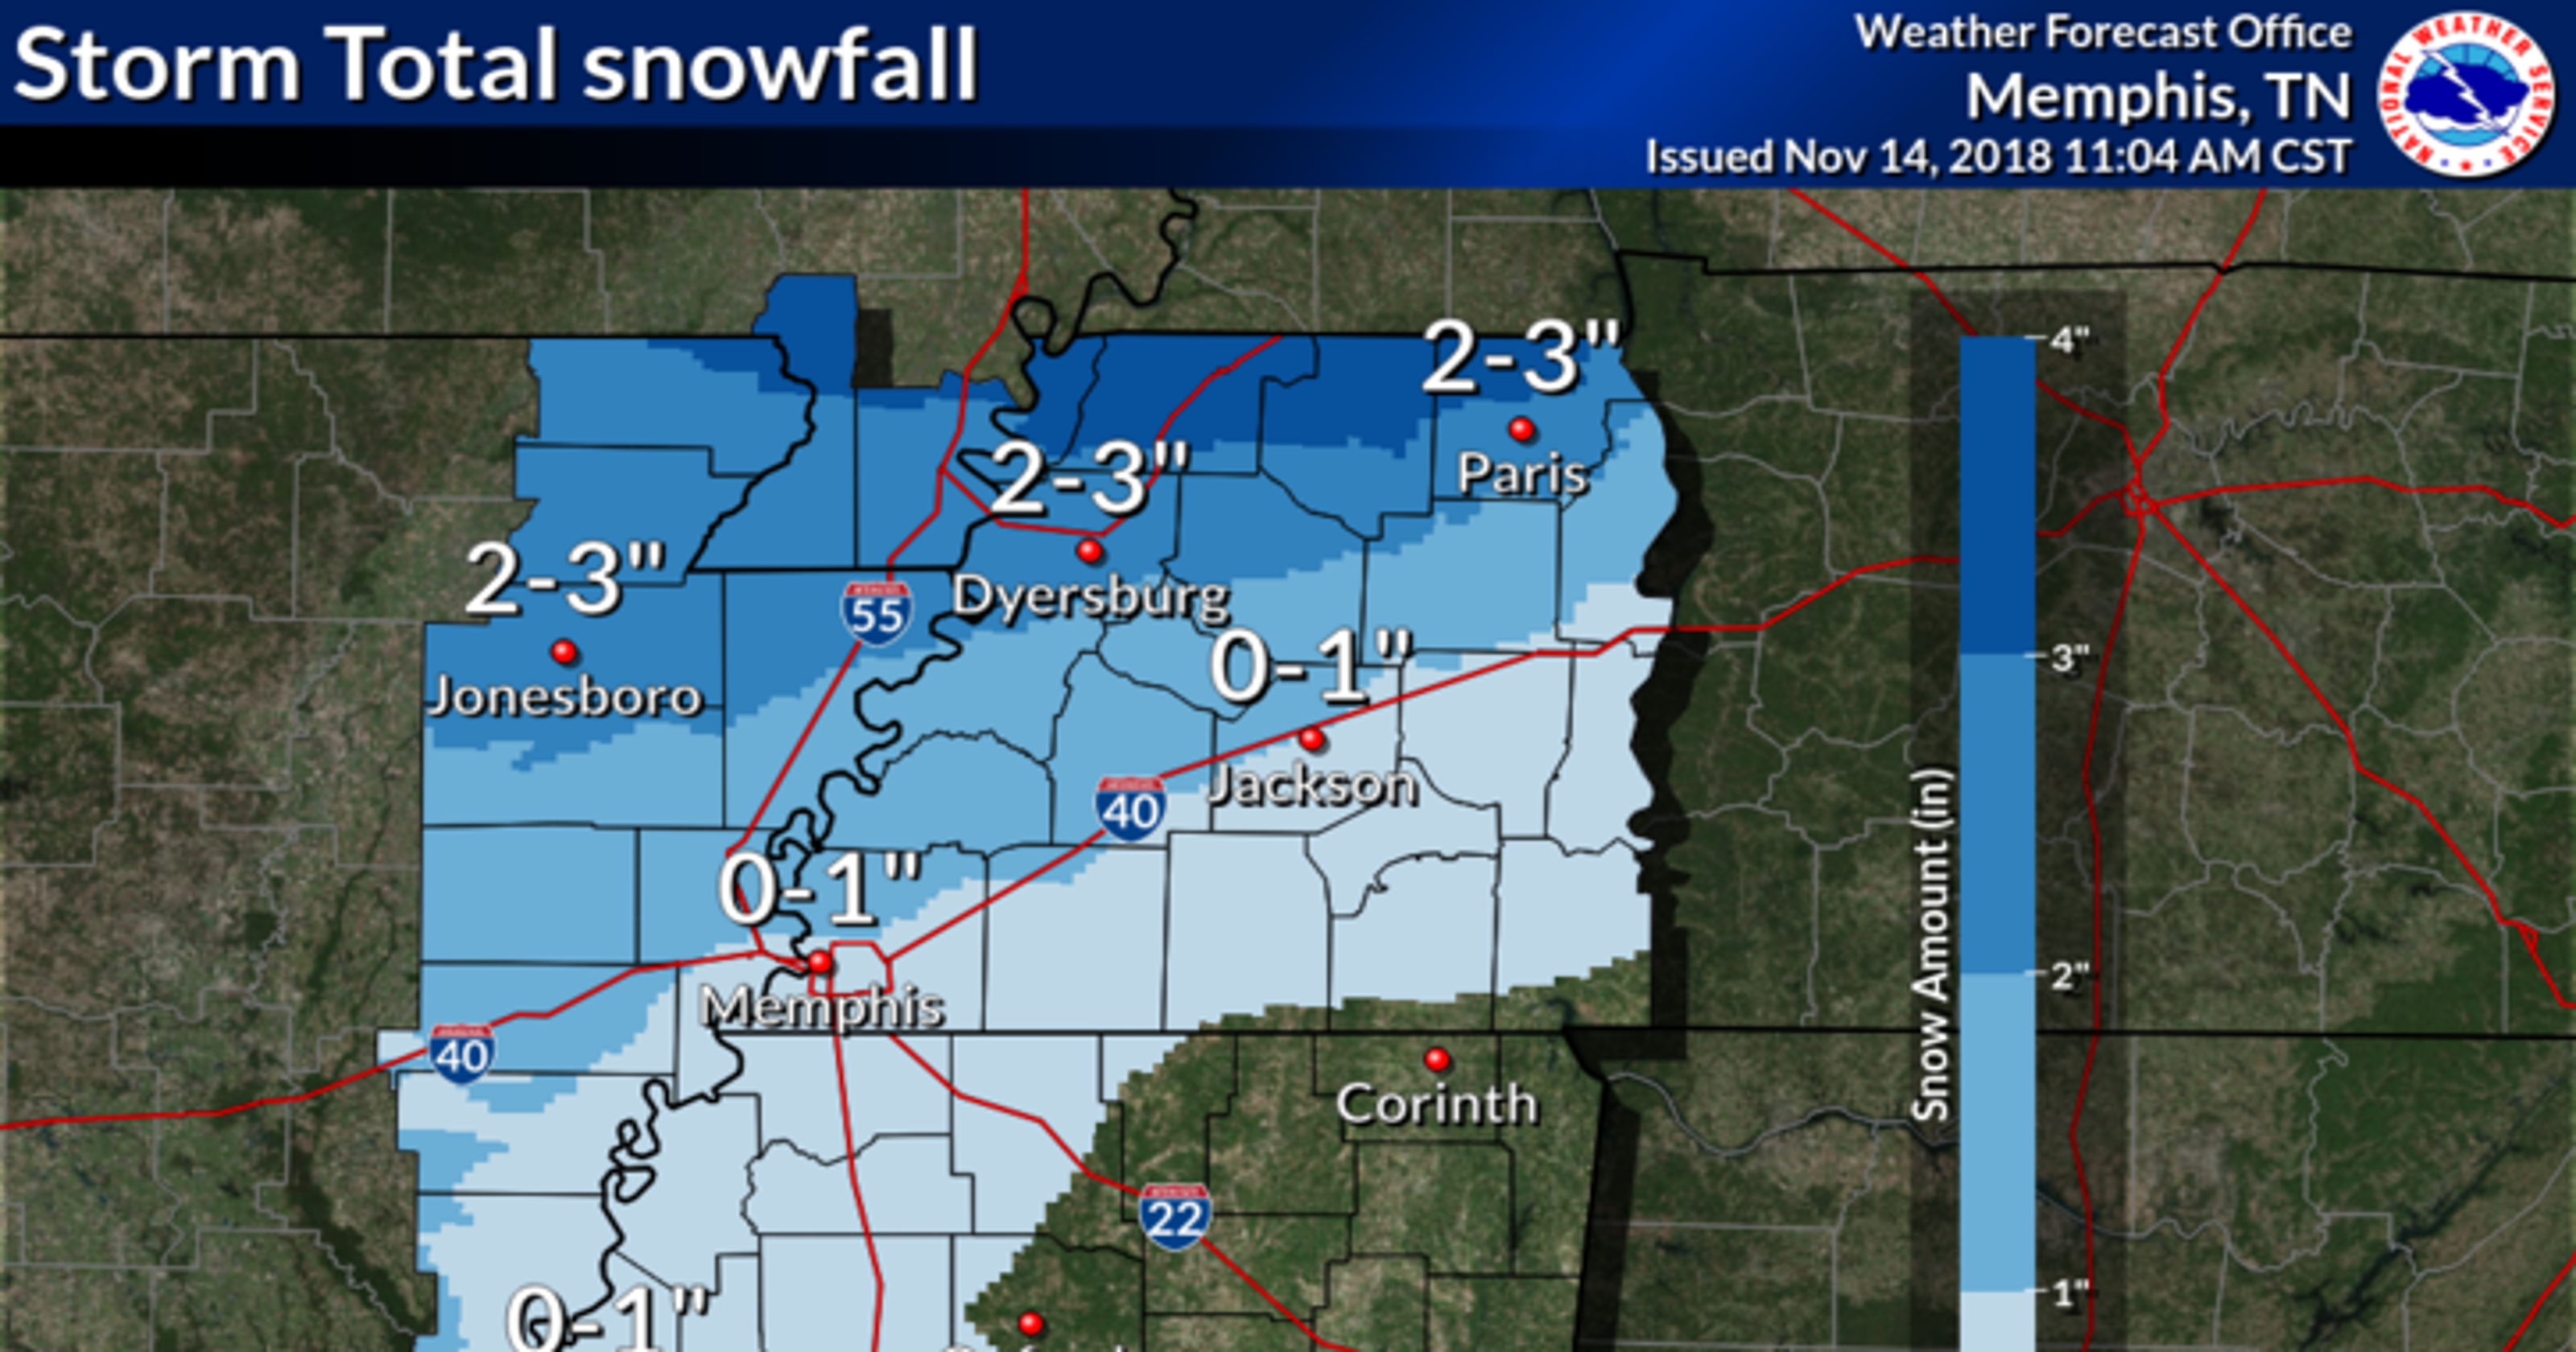 Memphis winter weather advisory issued, snow expected in parts of MidSouth